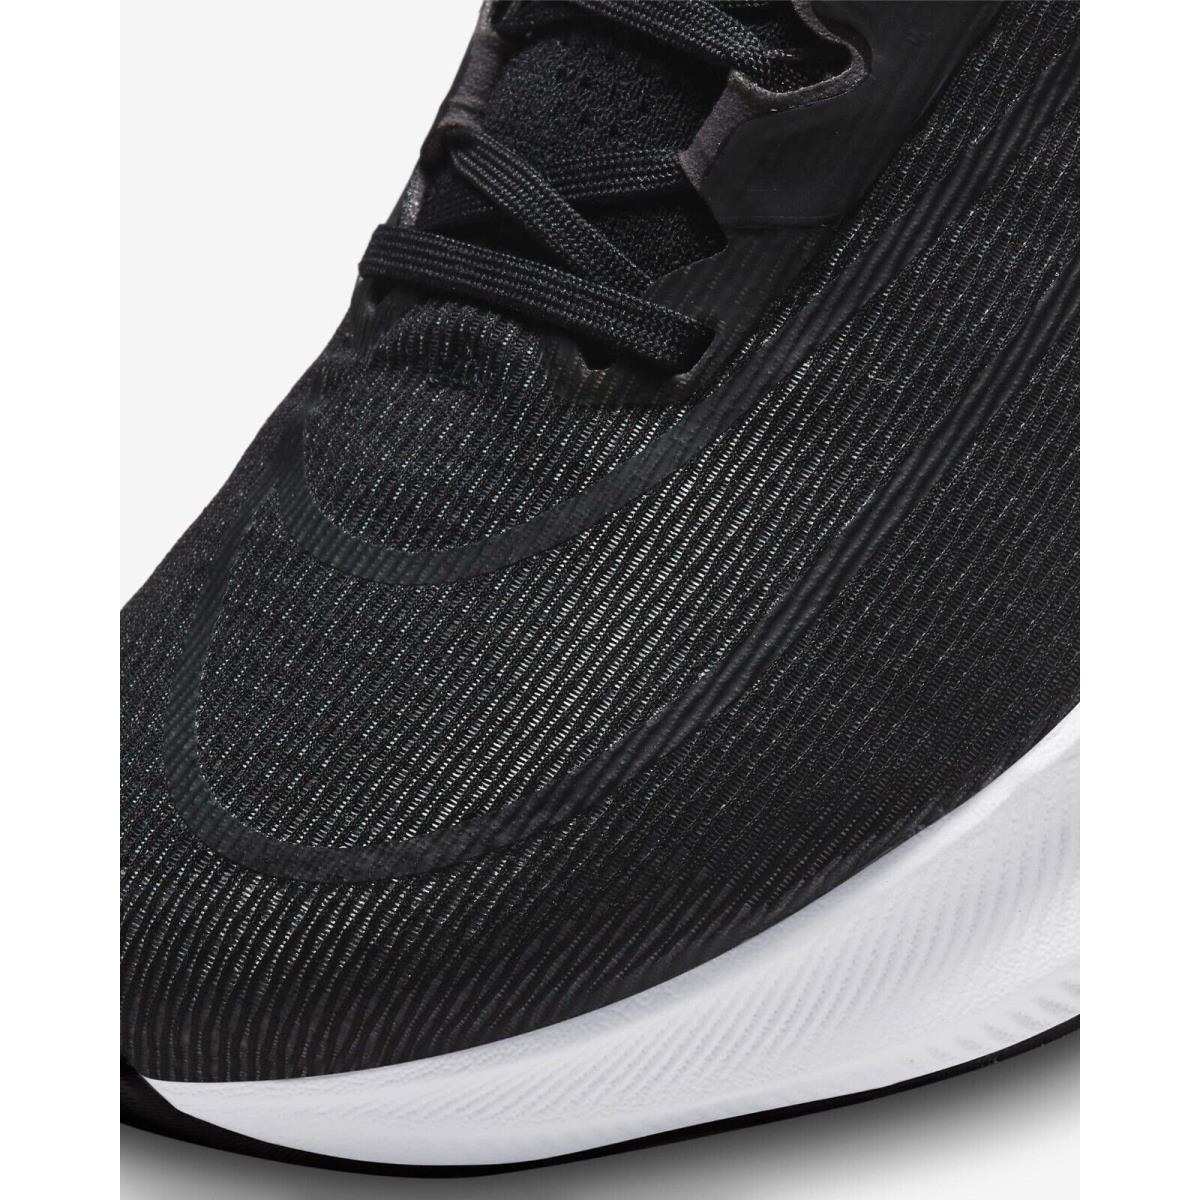 Nike shoes Zoom Fly - Black 6